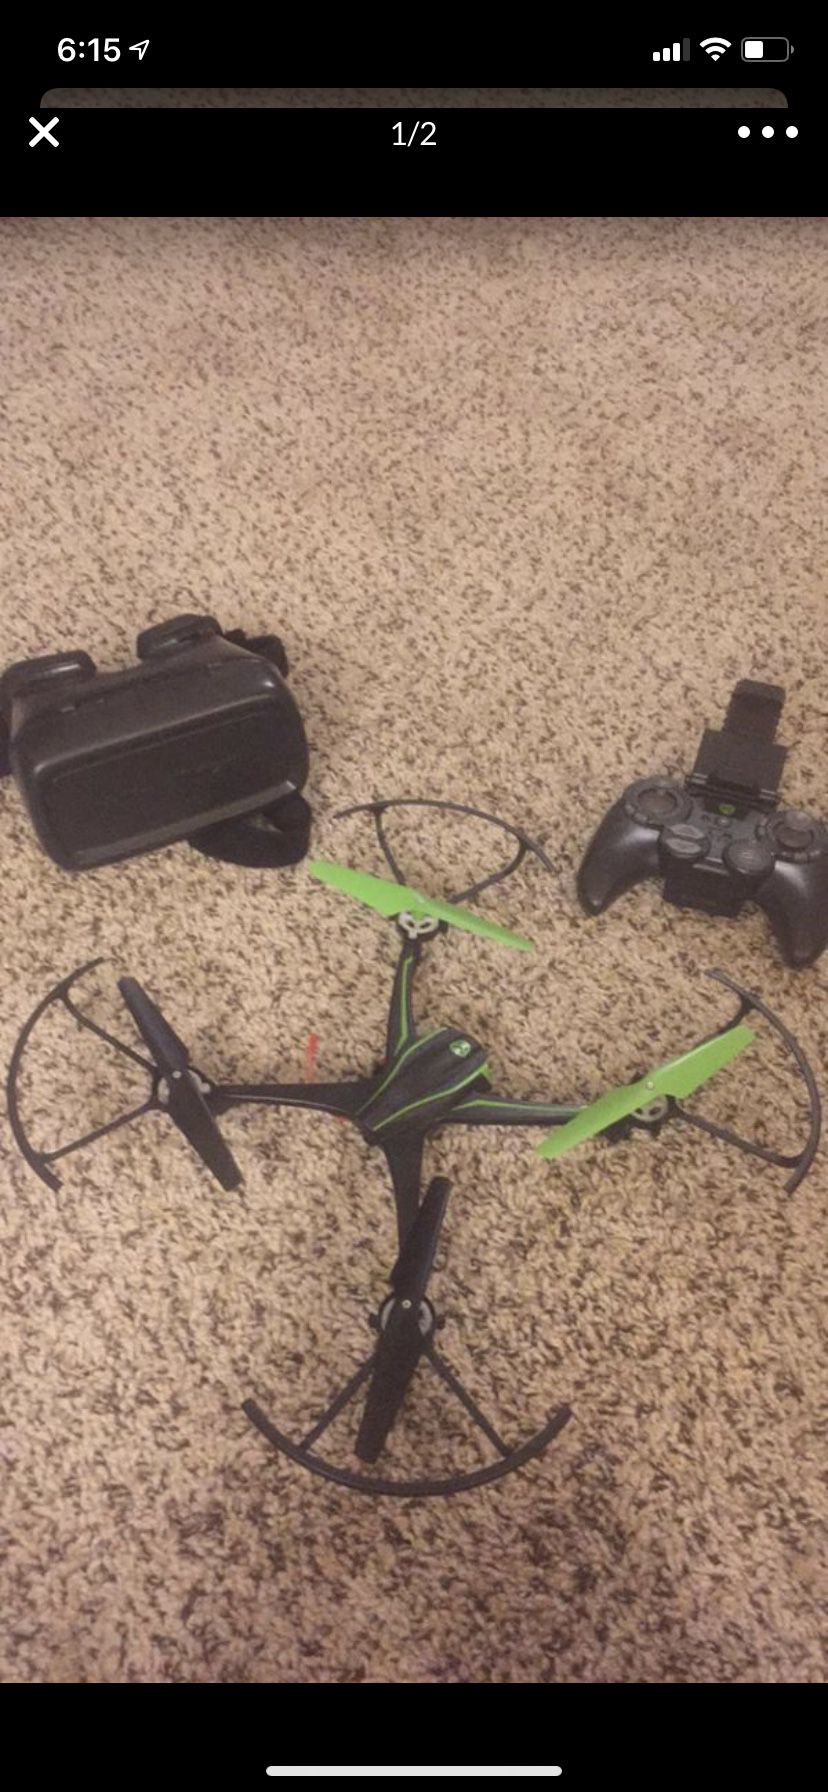 Drone - Sky Viper Drone with FPV headset